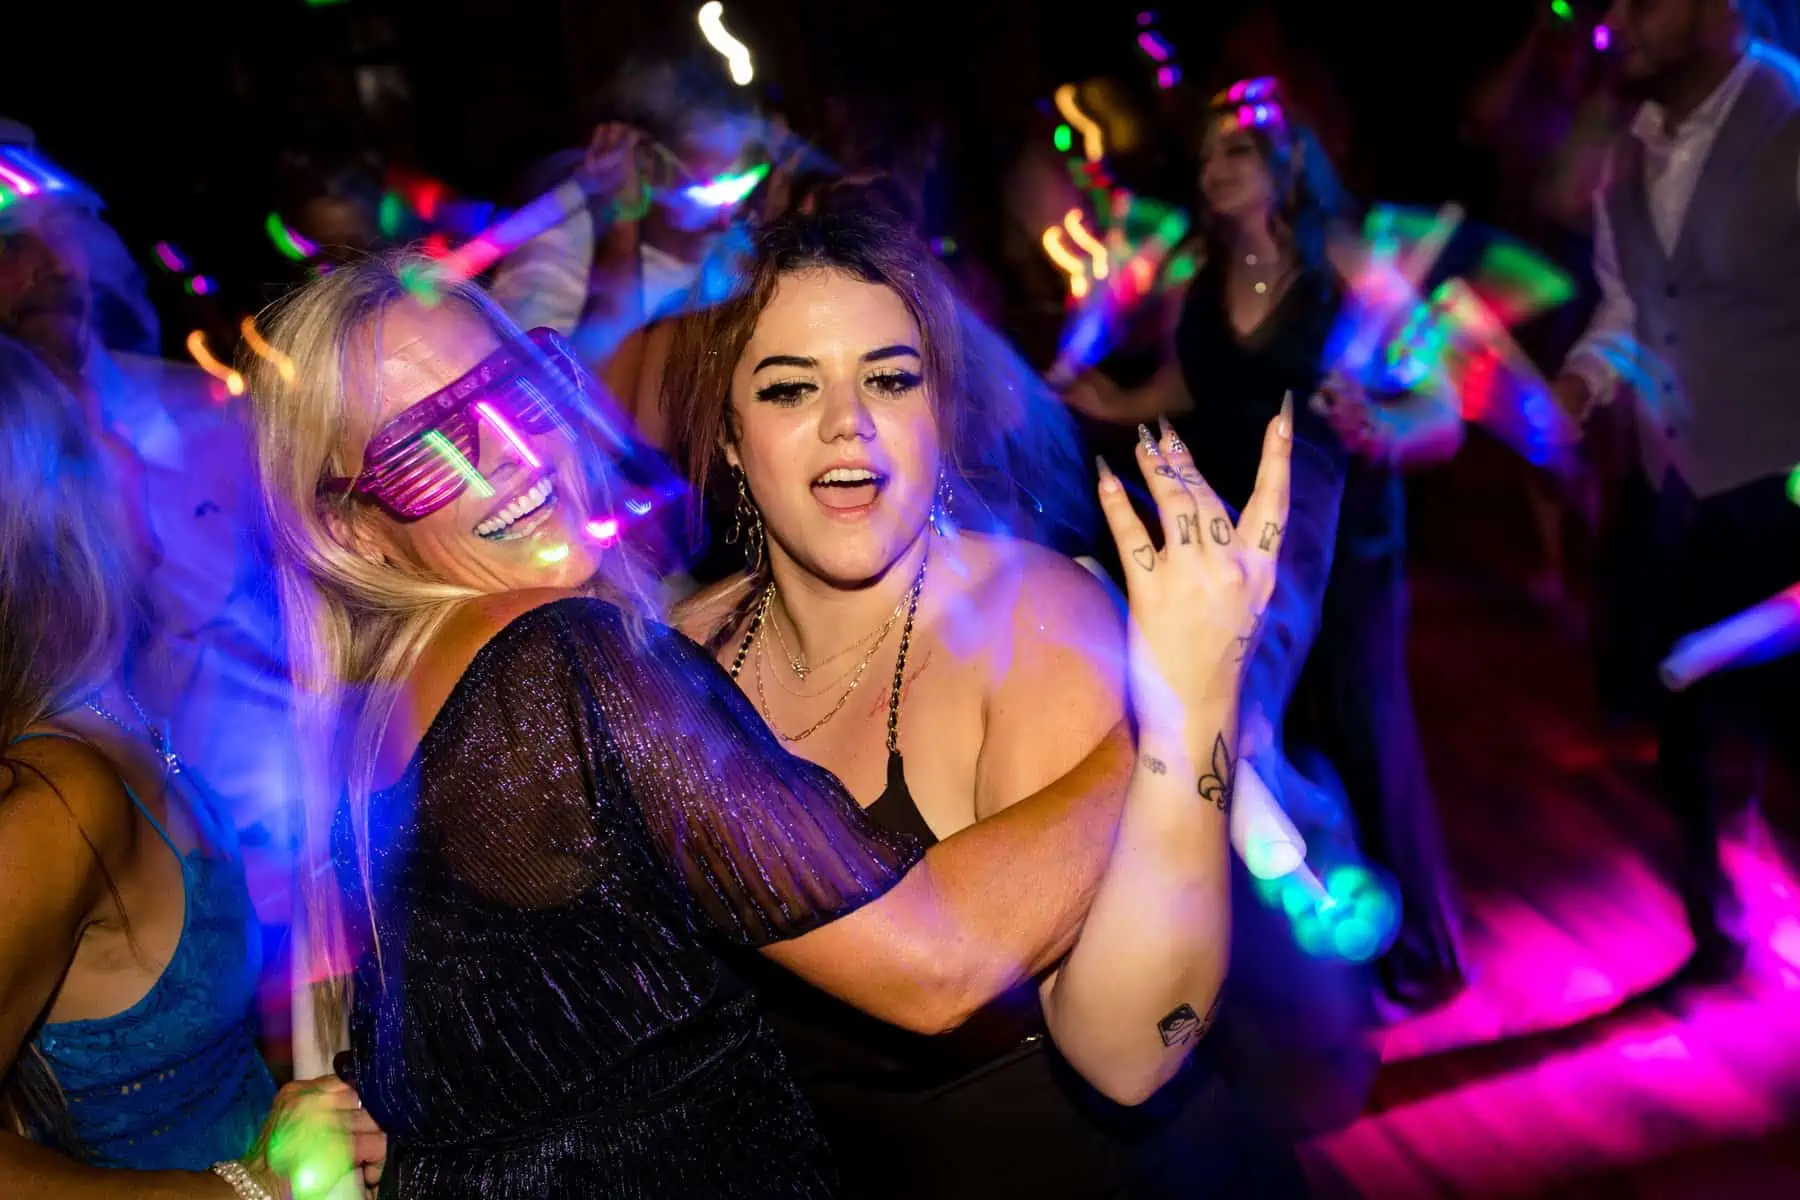 Two women dancing with glow sticks at a party.